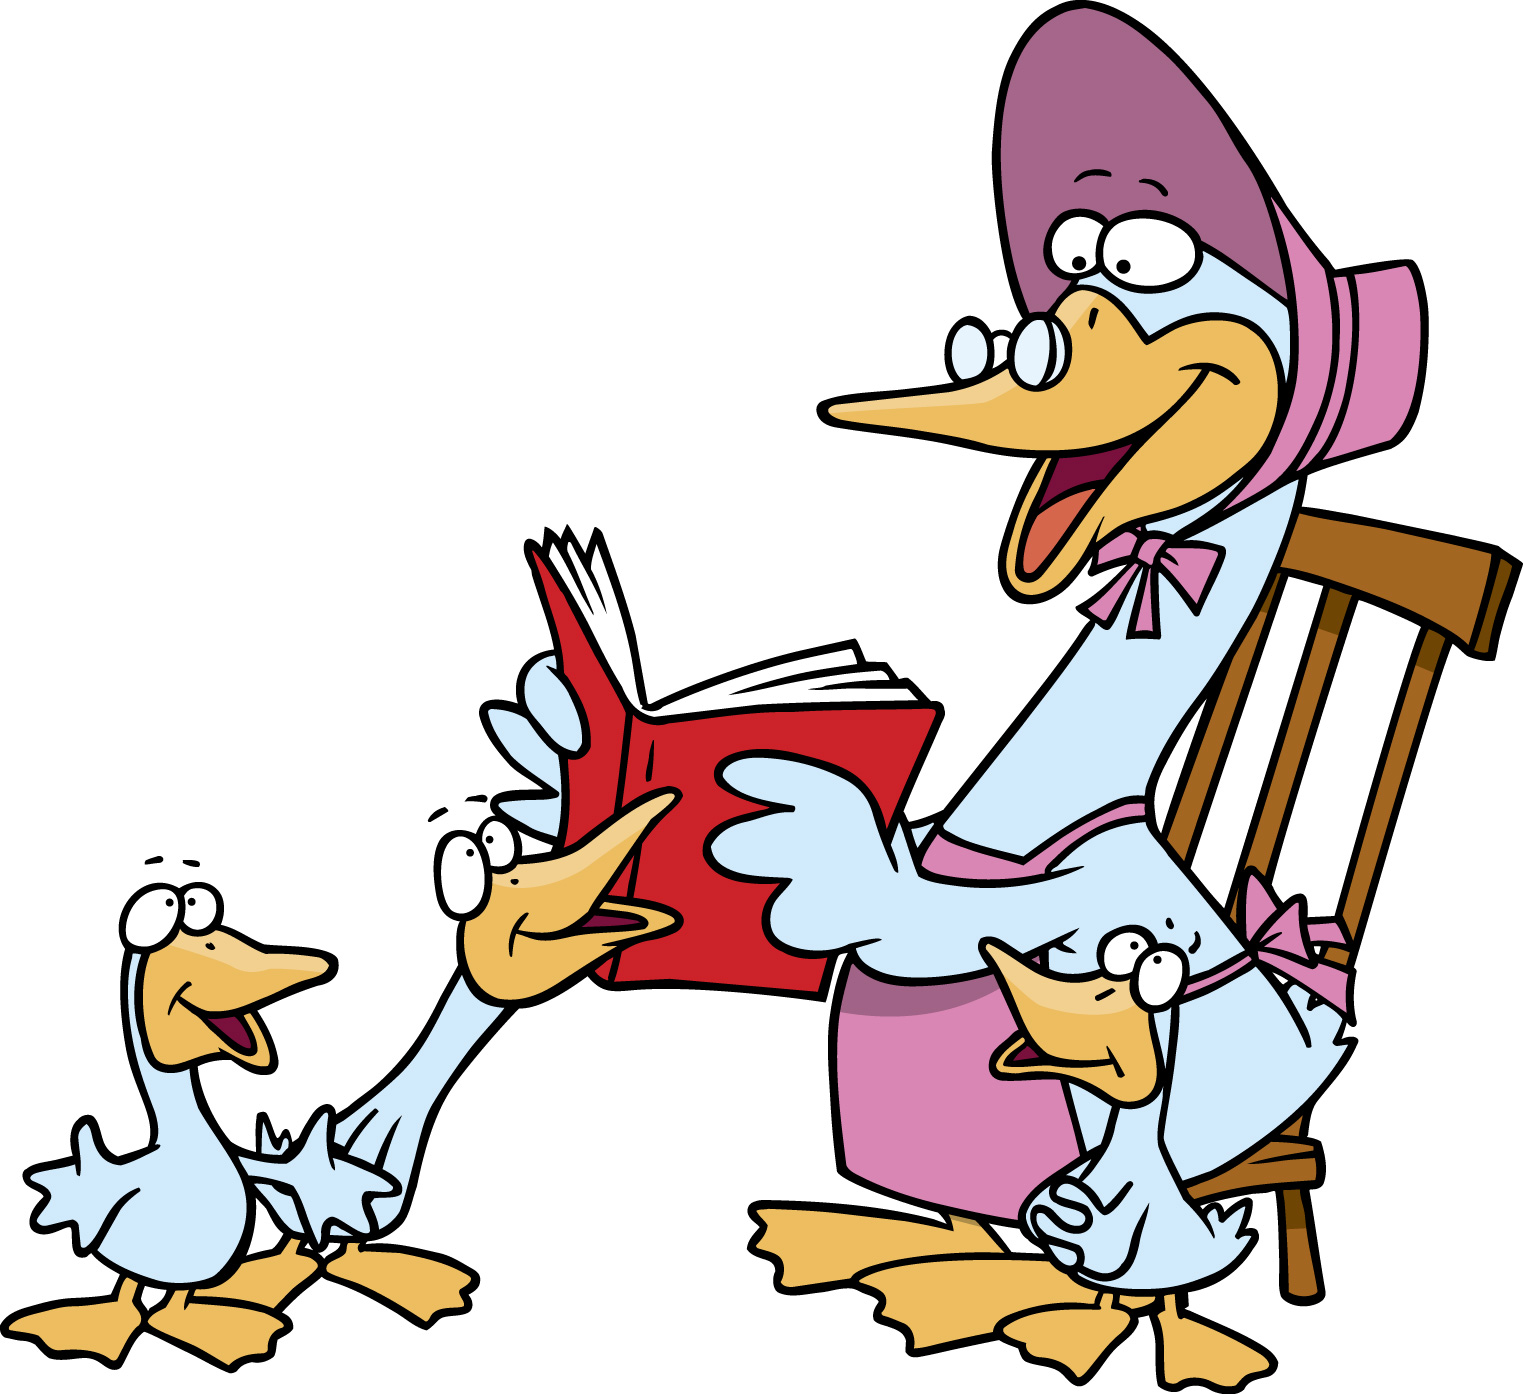 mother goose clipart images - photo #25